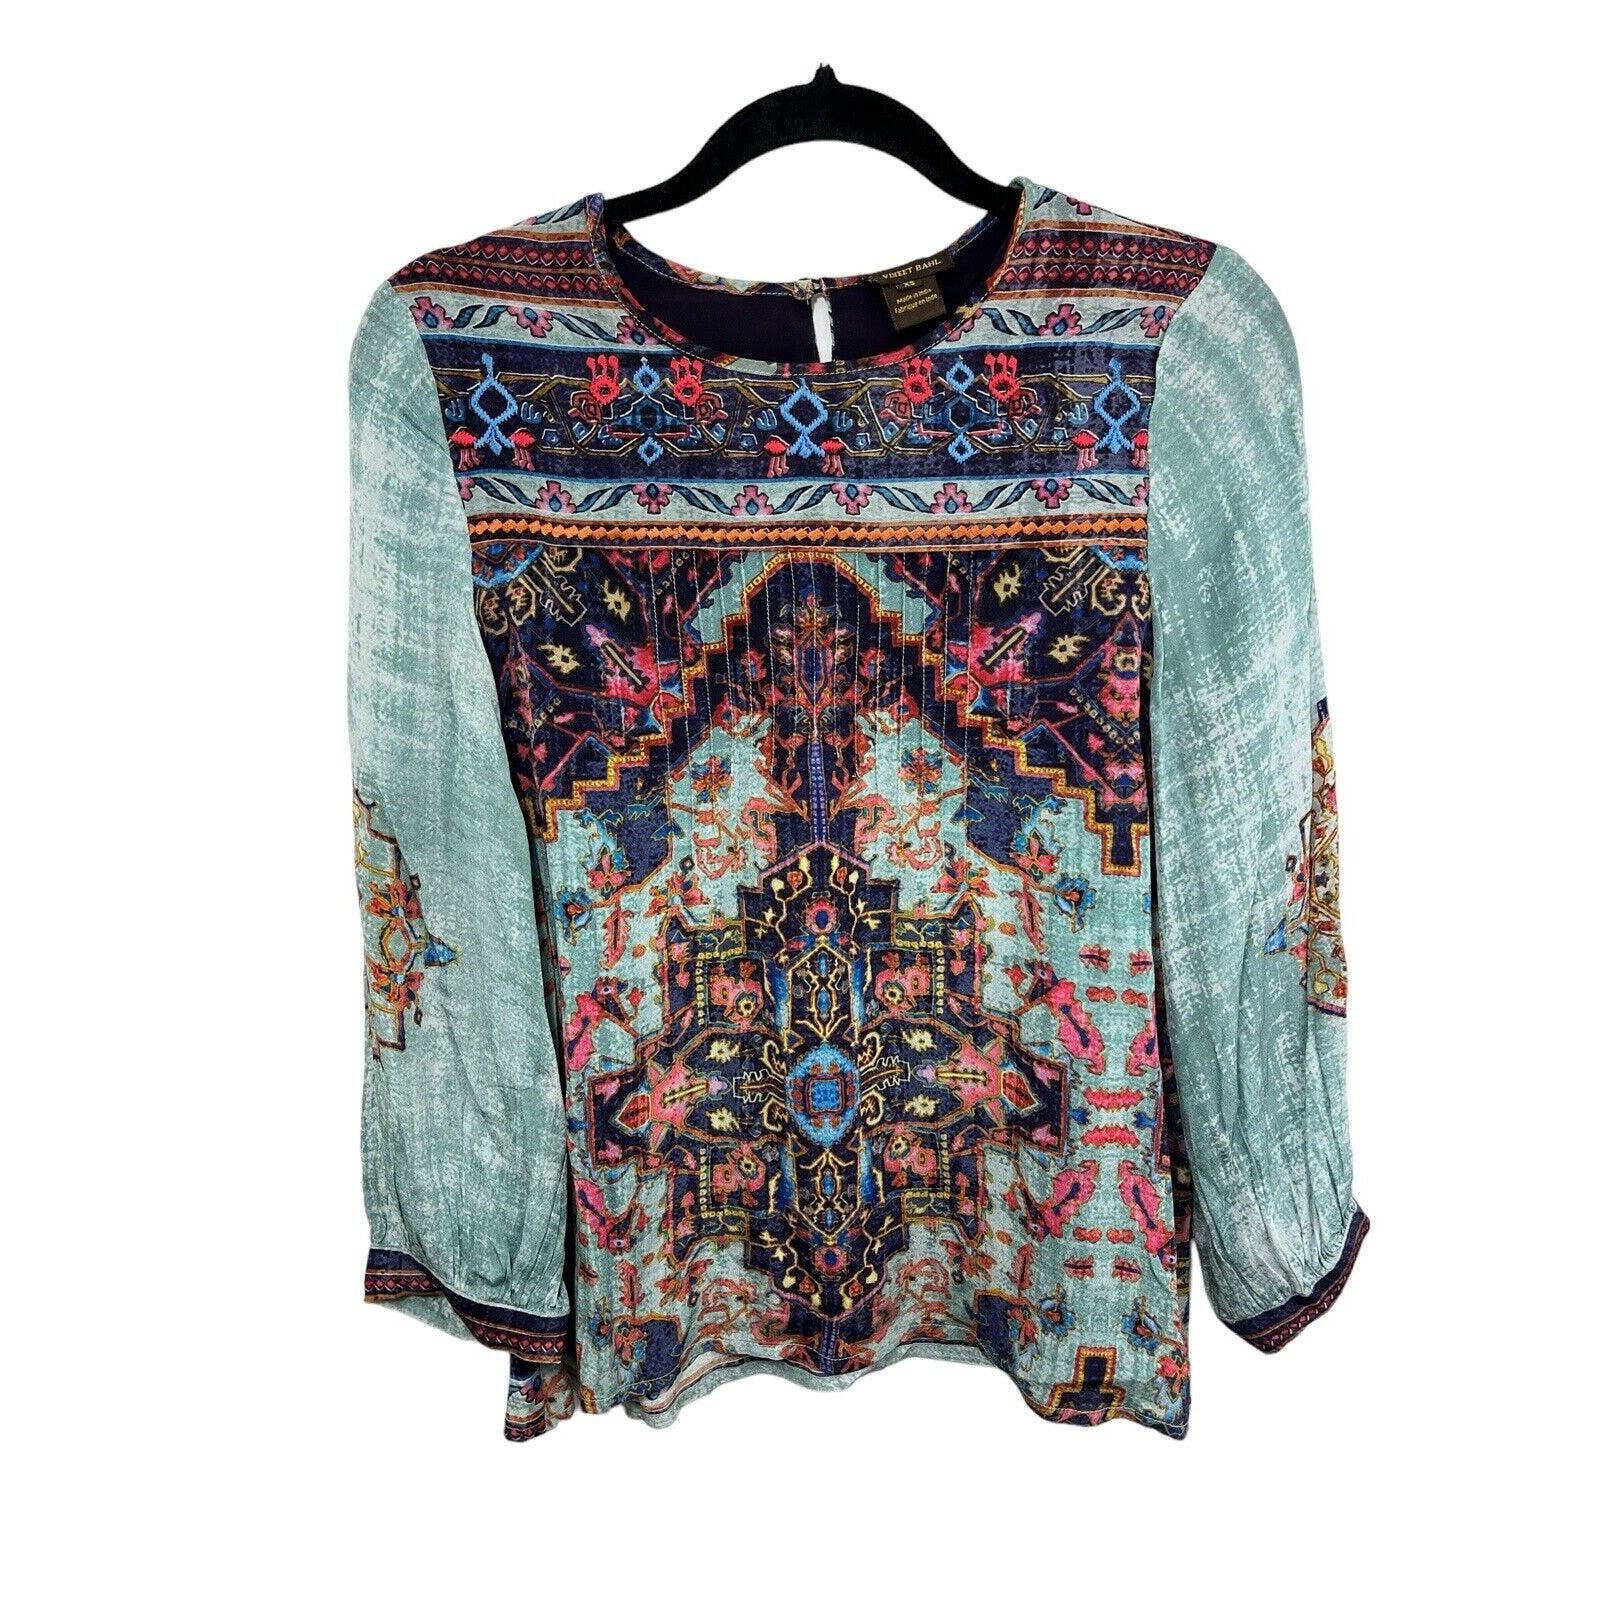 Promotions  Anthropologie VINEET BAHL PRUDENCE Bohemian Blouse SZ XS Teal Hippy Boho hDrLYM3pD Discount